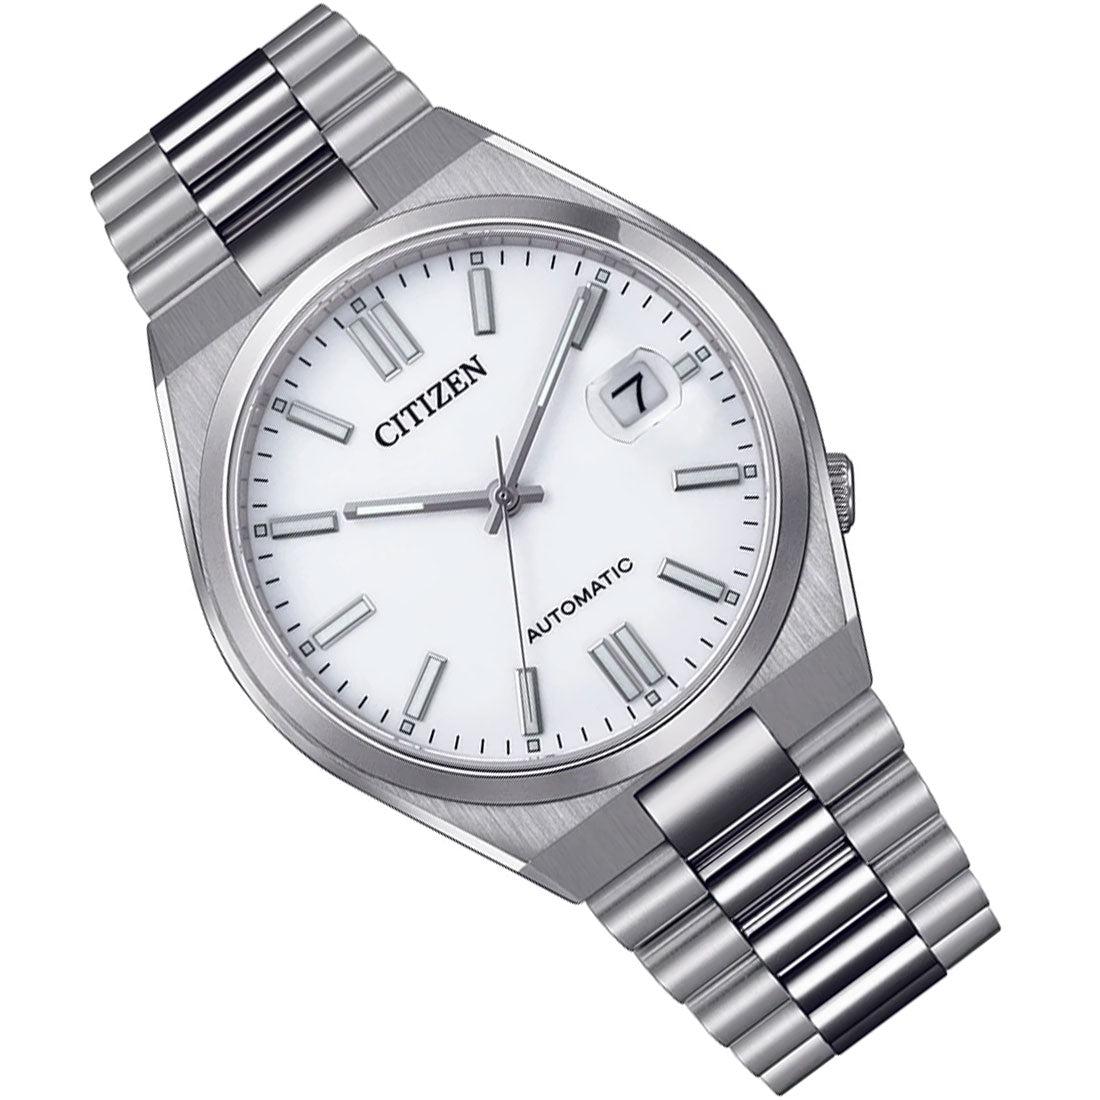 Citizen Mechanical White Dial NJ0150-81A Stainless Steel Analog Casual Watch -Citizen